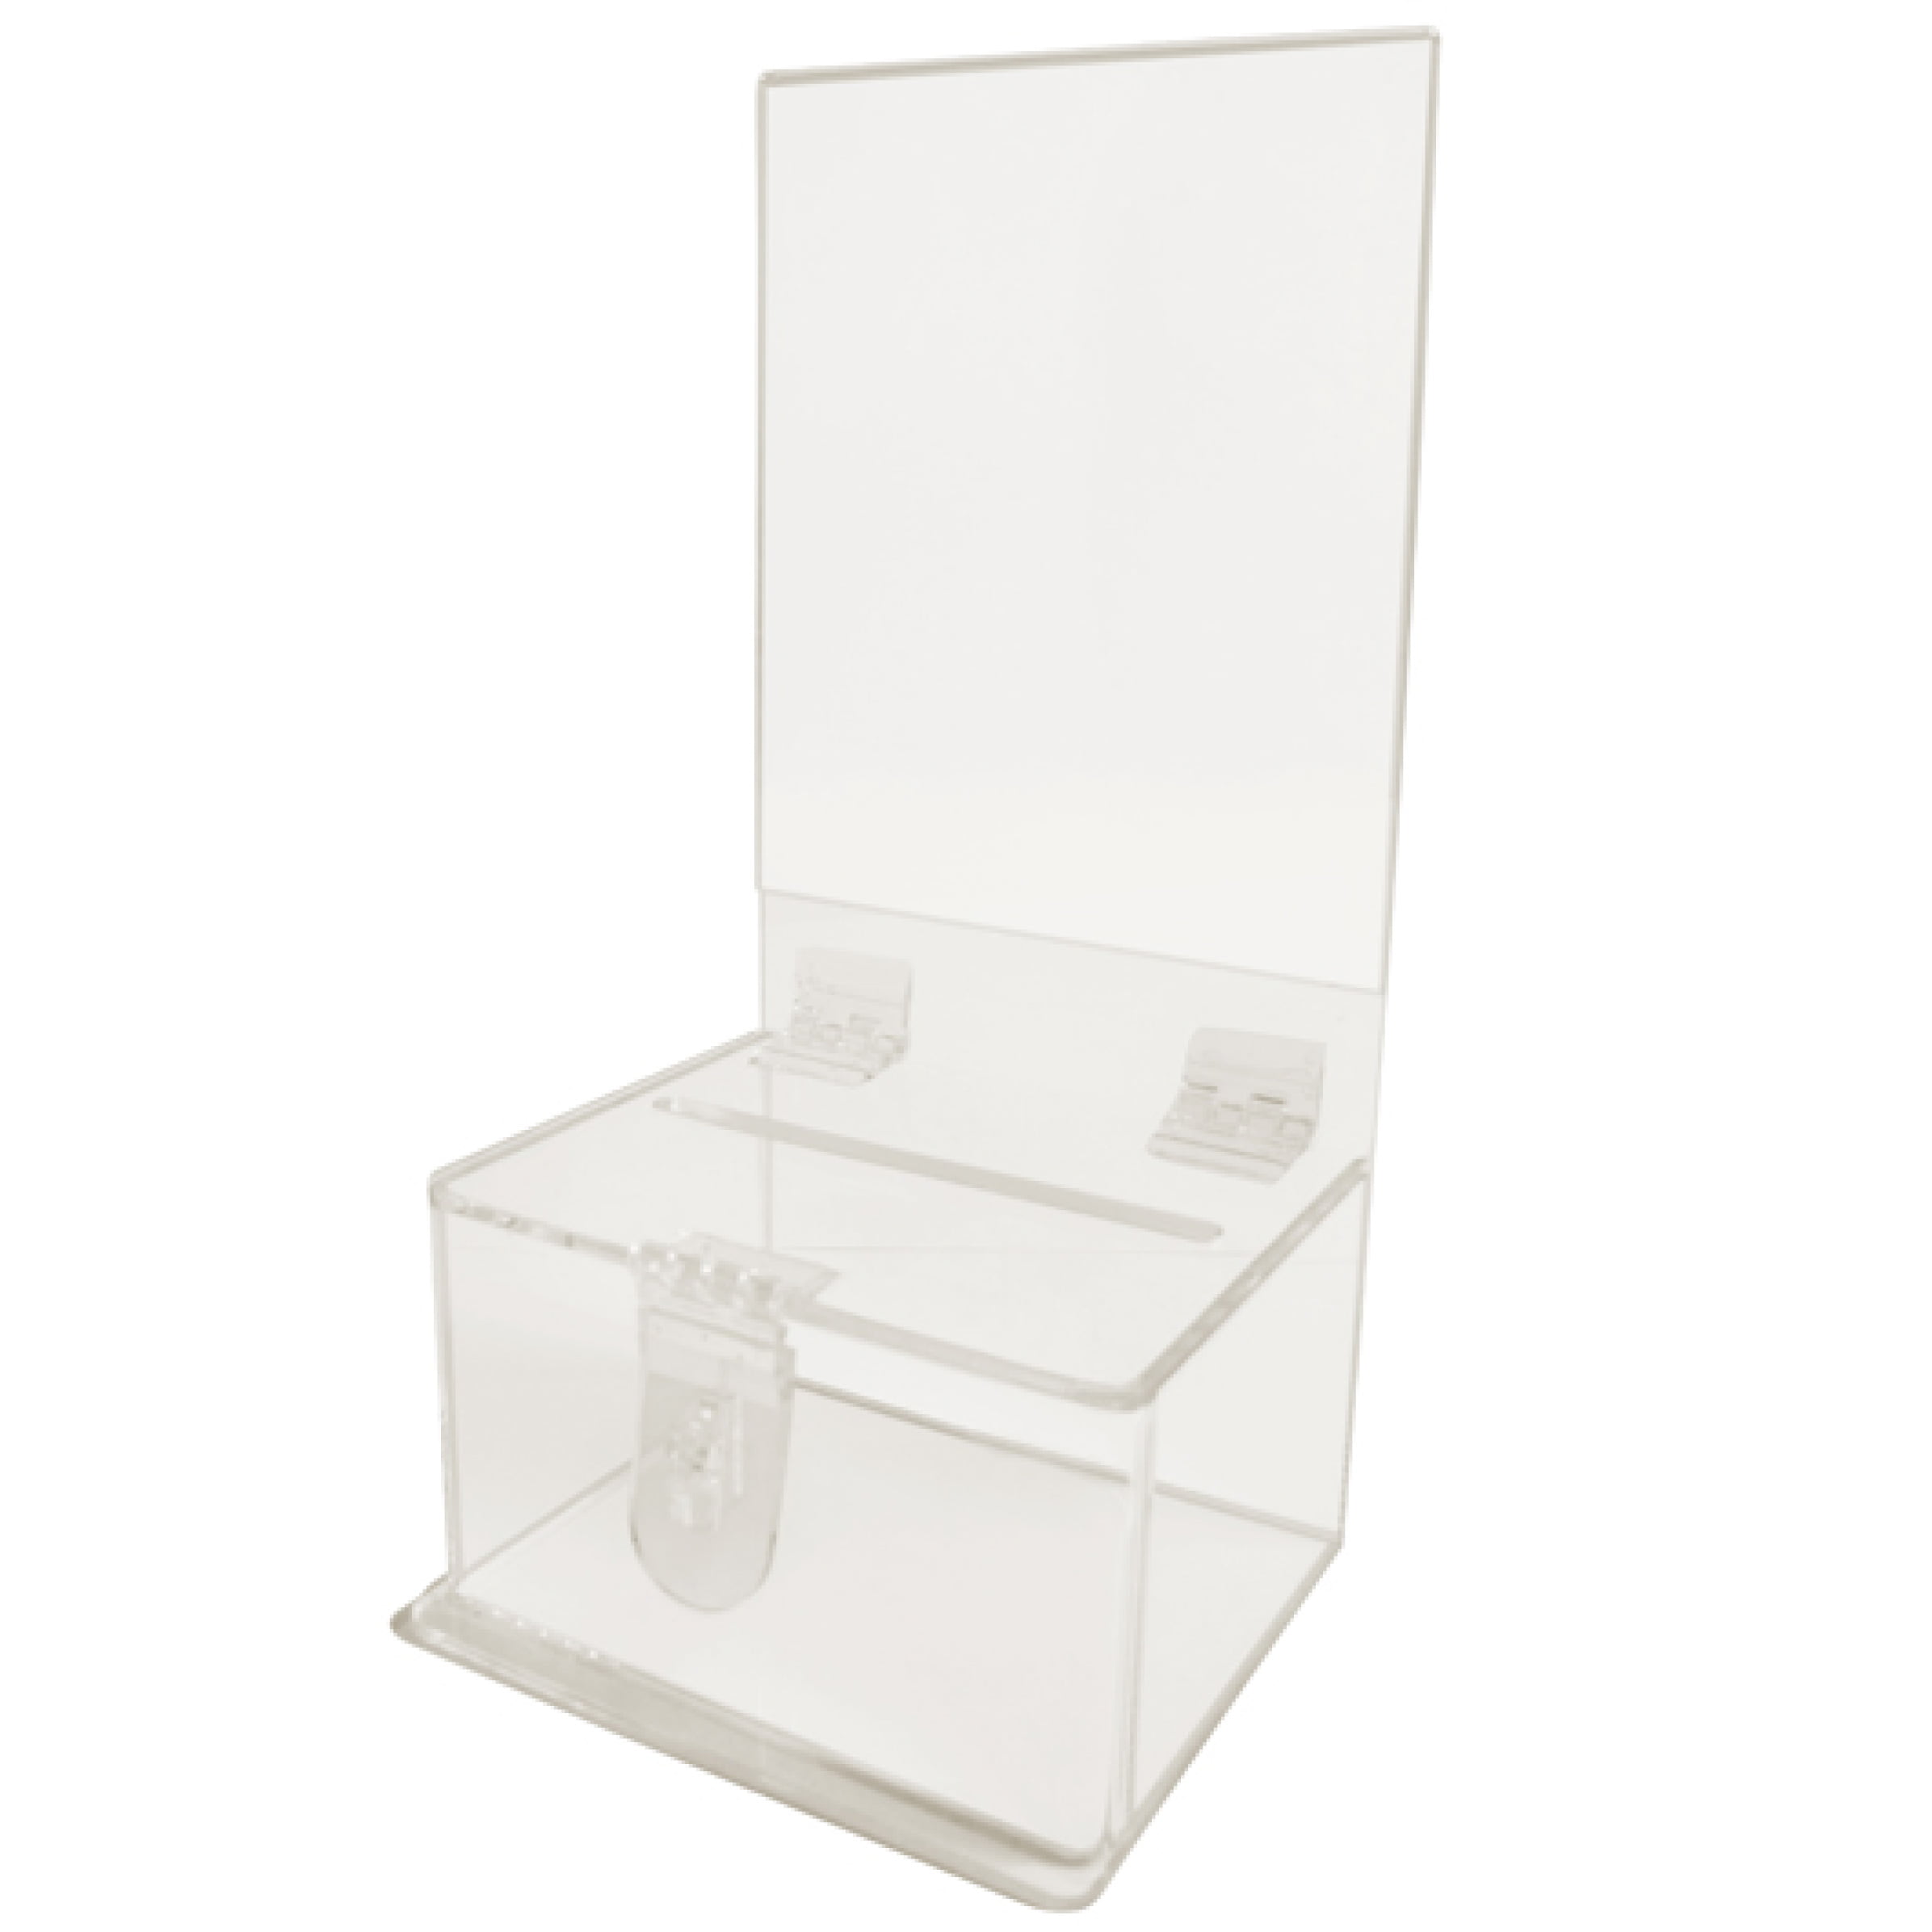 for Fundraising Donation Box Clear Ticket Box MCB Locked Donation Box with Back Wall Clear Display Area Collection Box 